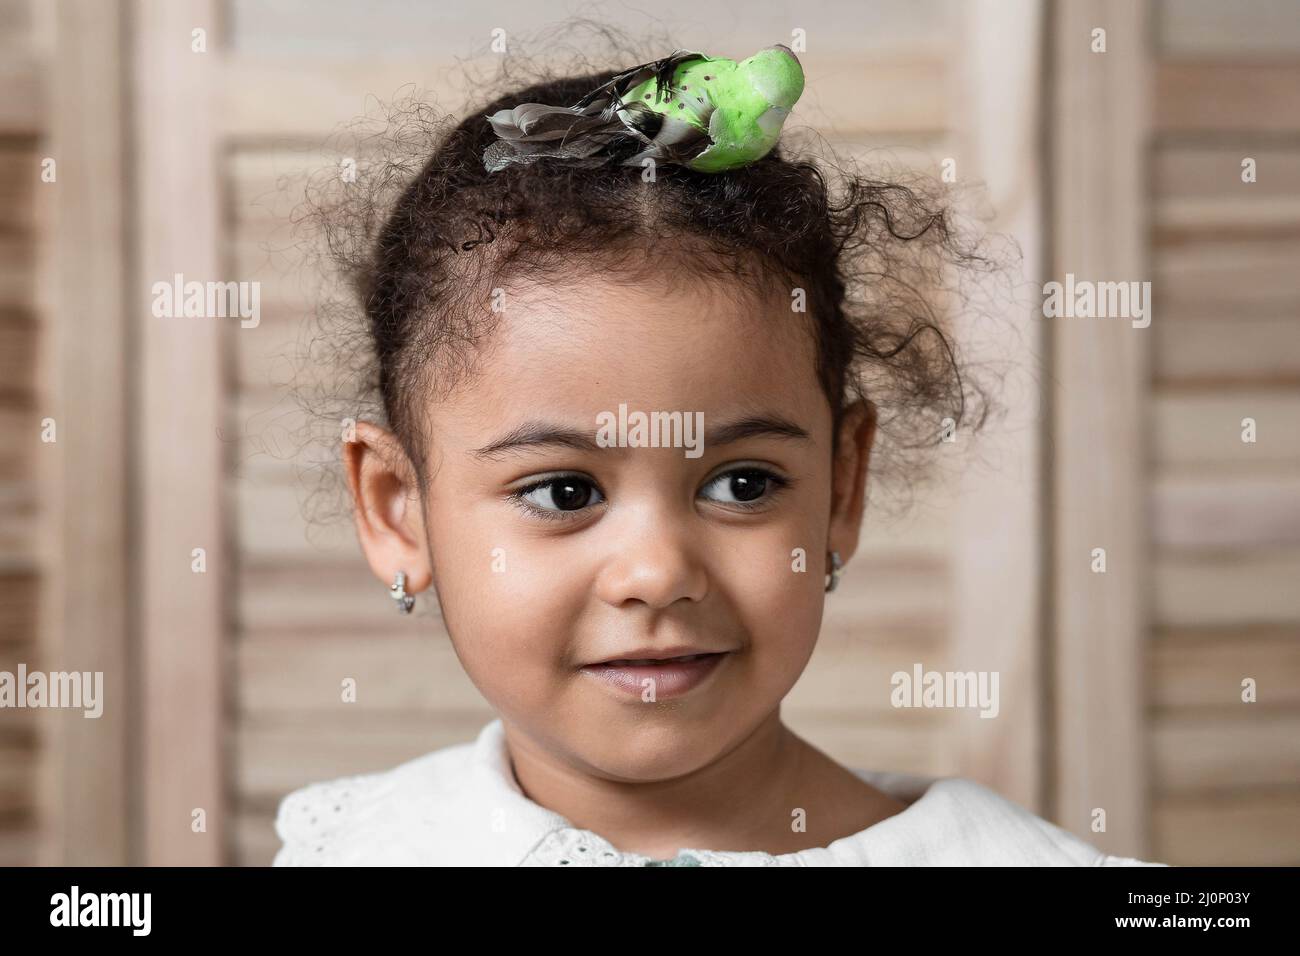 Adorable mixed-race little girl with parrot hair accessory Stock Photo